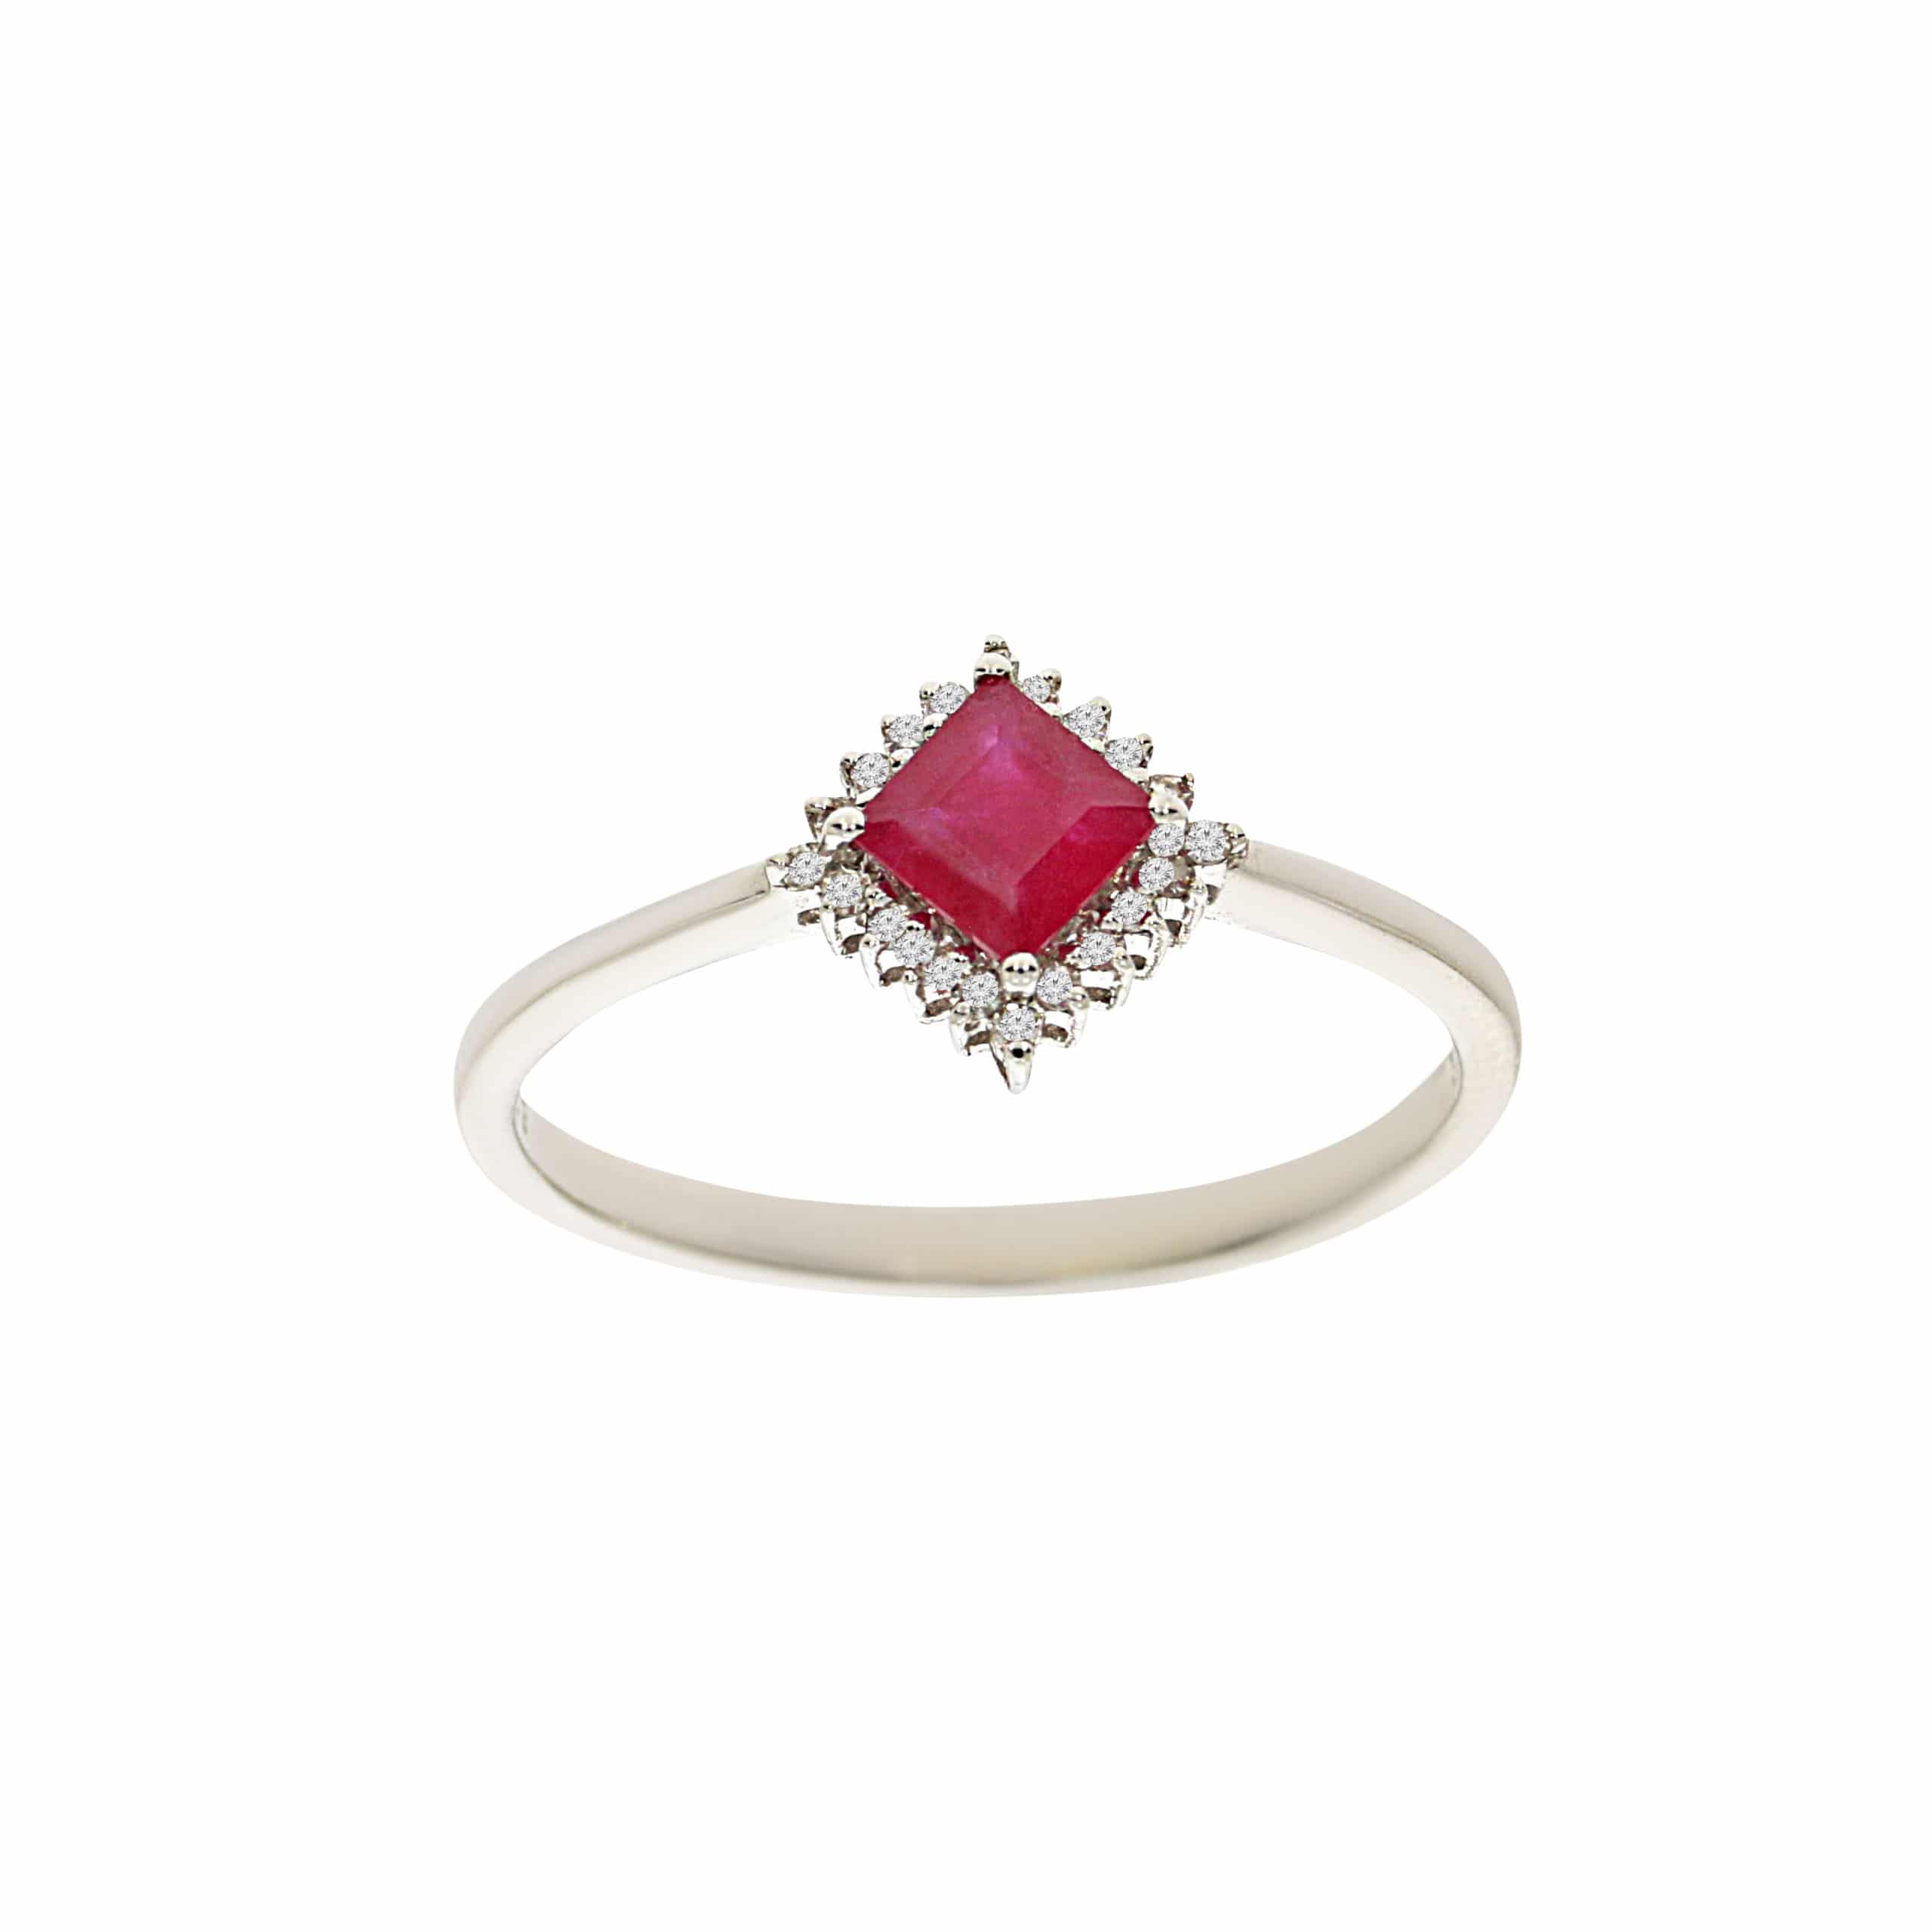 0.45ct Ruby and Diamonds Ring, 14K White Gold